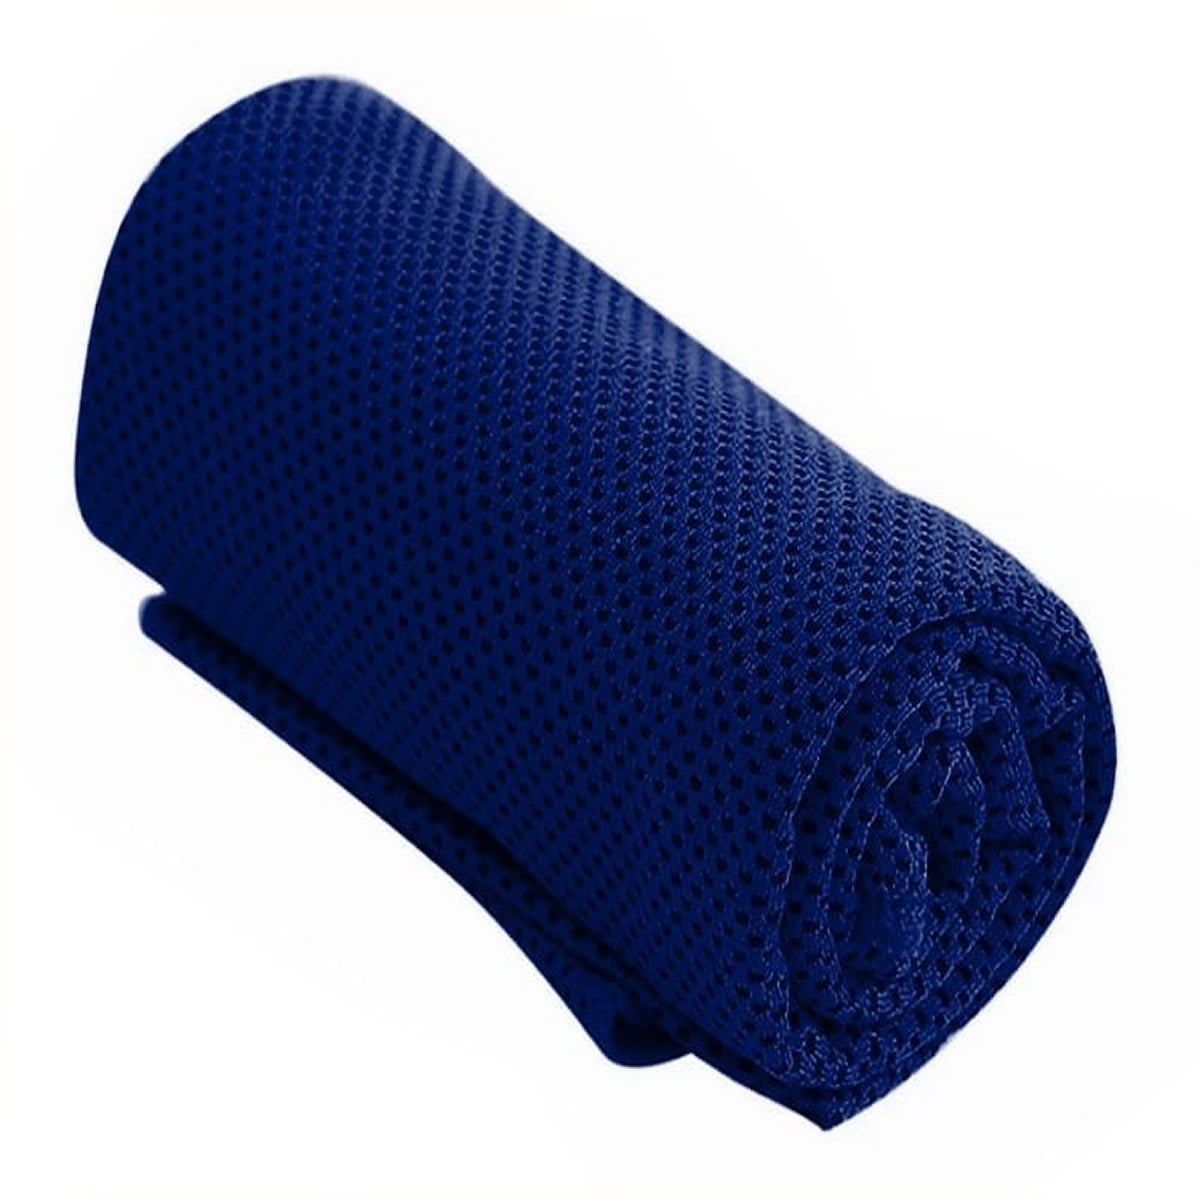 G-100 - Premium Large Sized Cooling Towel (40" x 12")